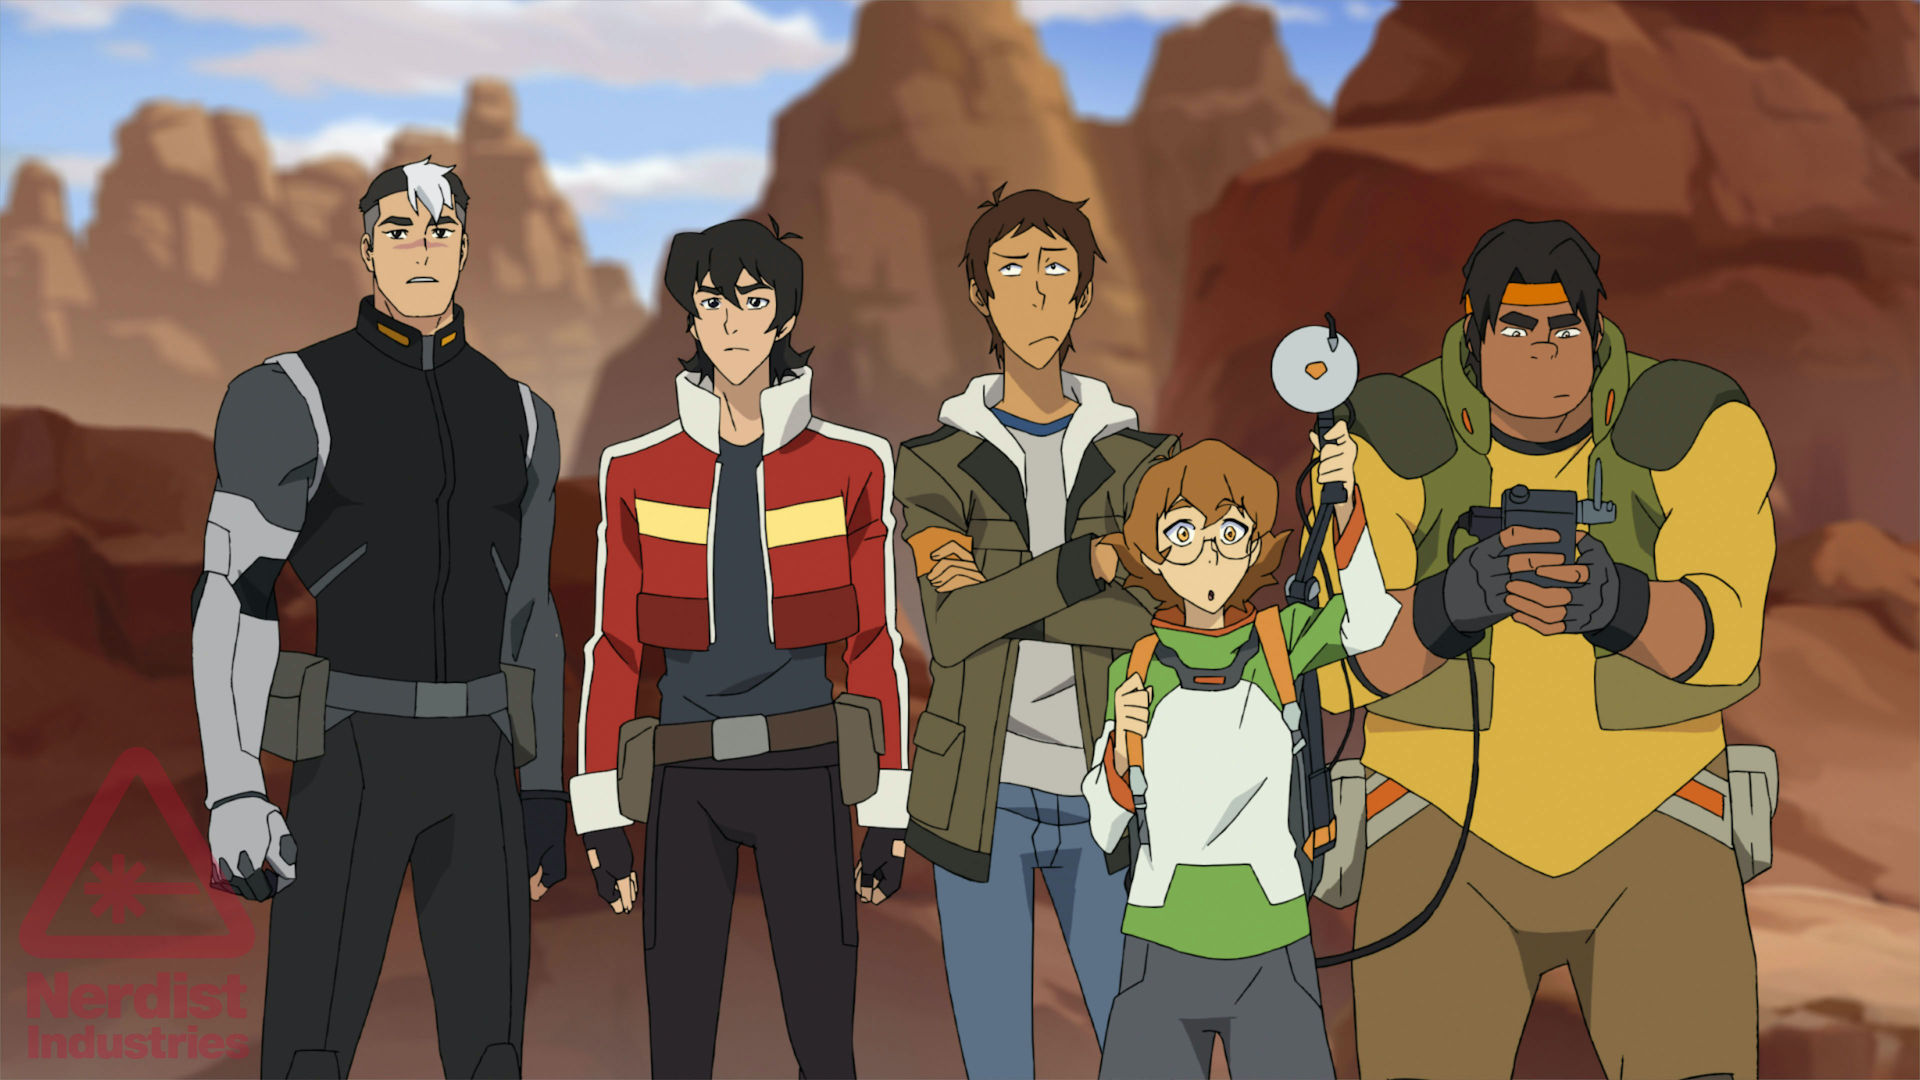 The Voltron force in Voltron: Legendary Defender